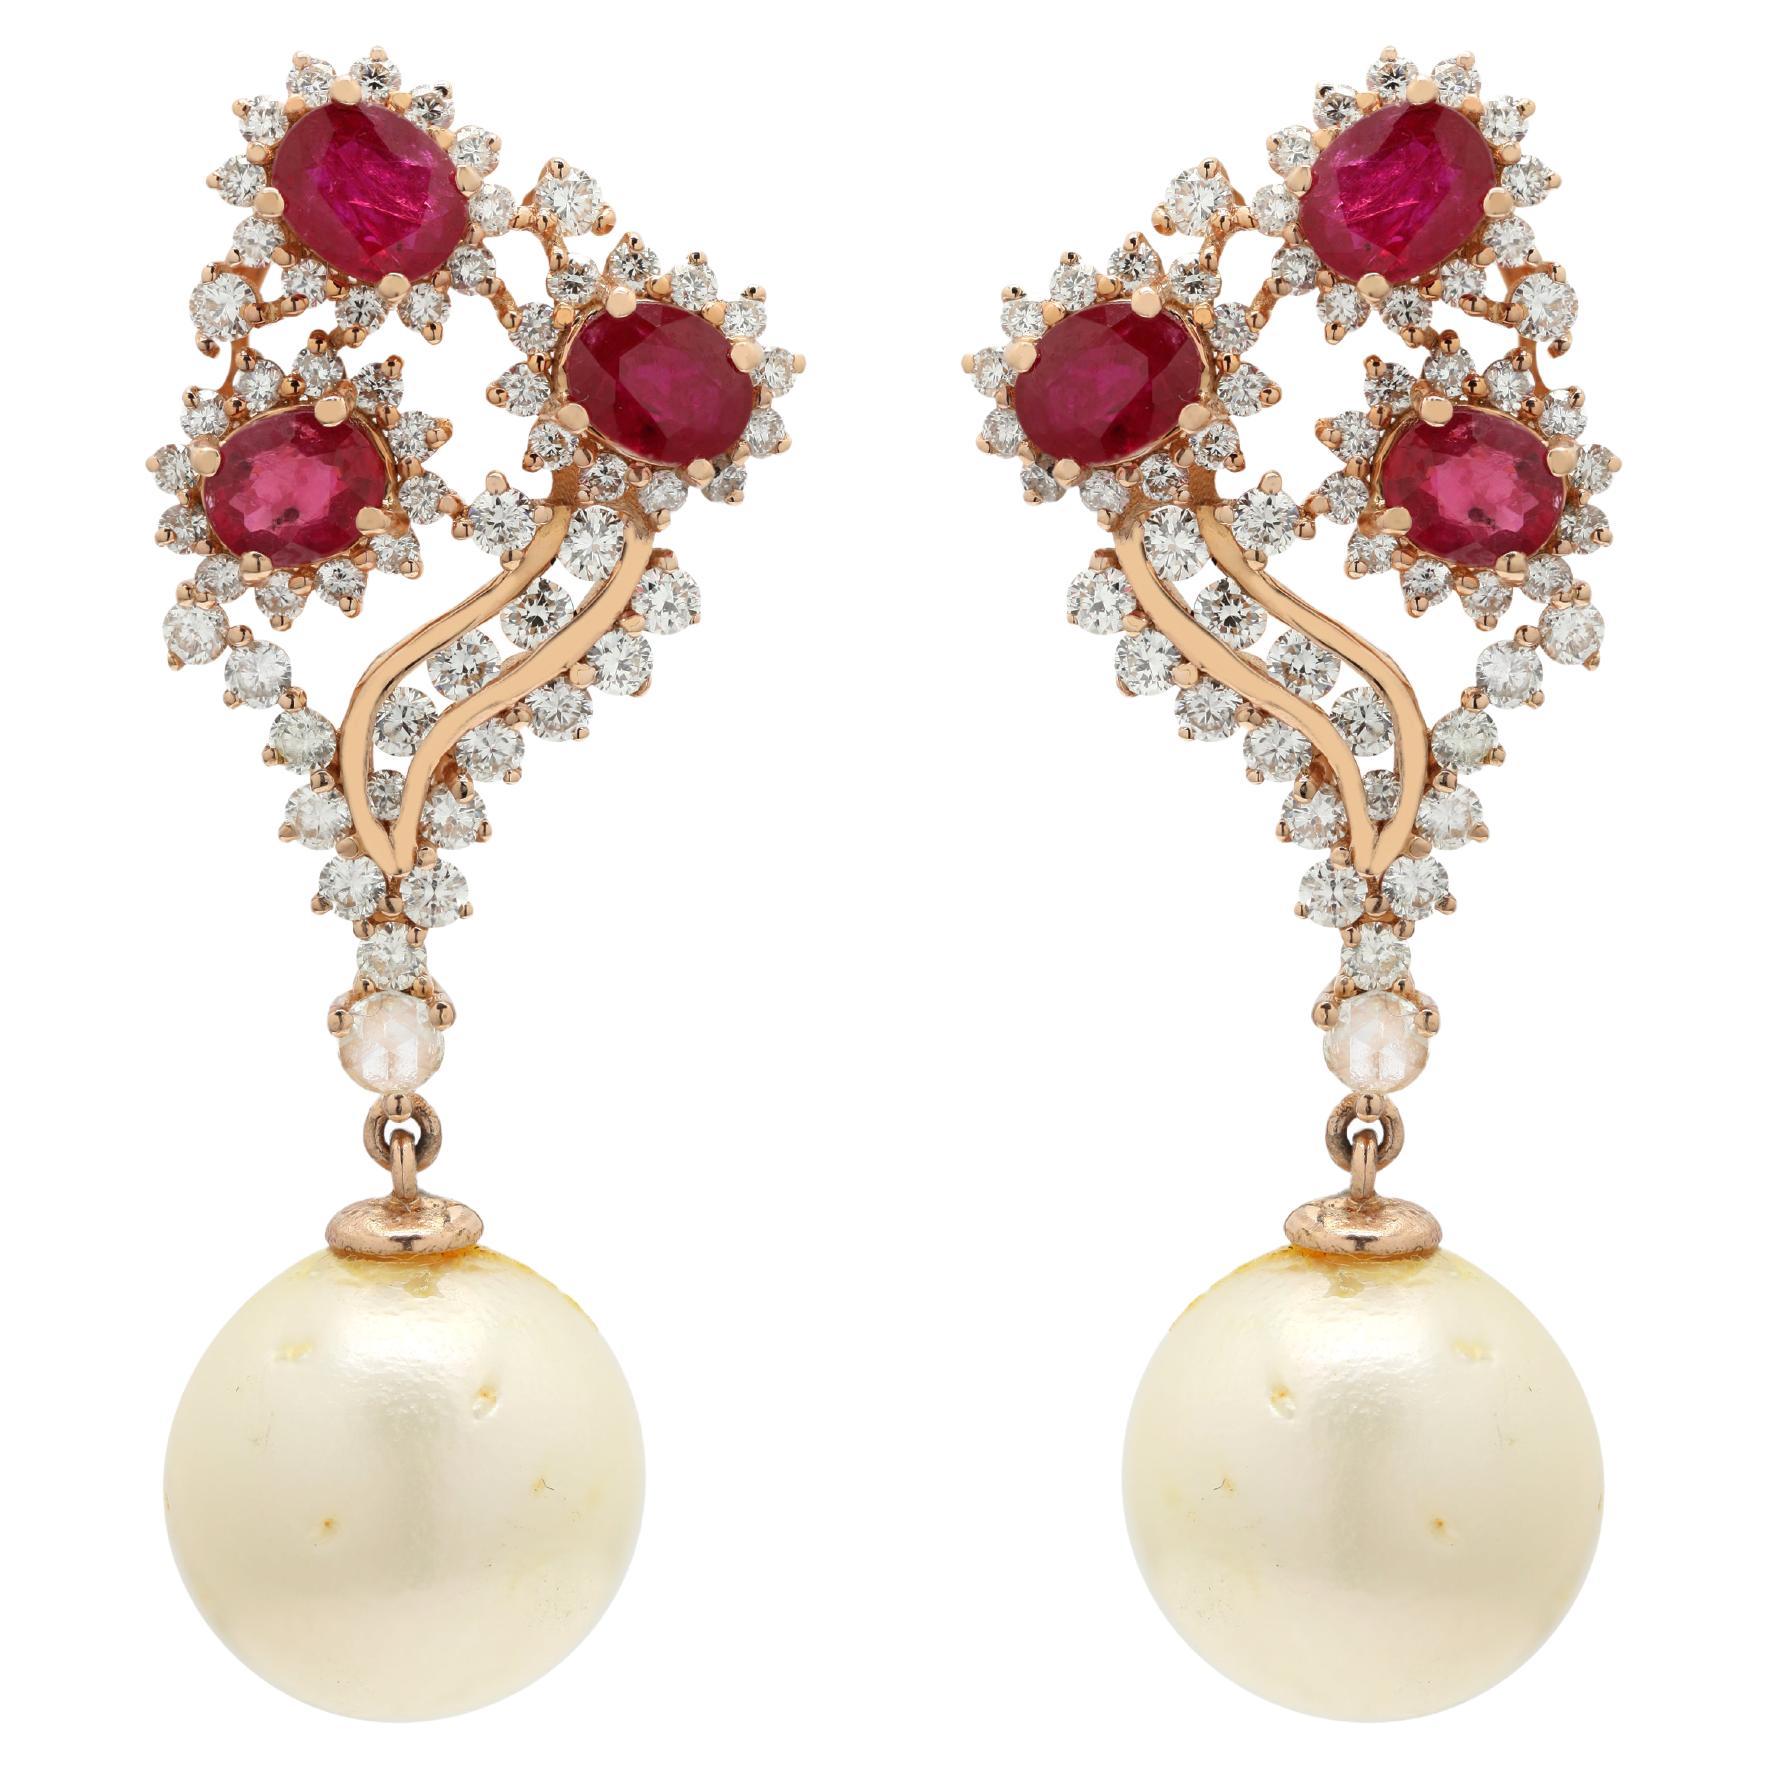 14k Rose Gold Floral 30.42 Ct Ruby and Diamond Earrings with Dangling Pearl